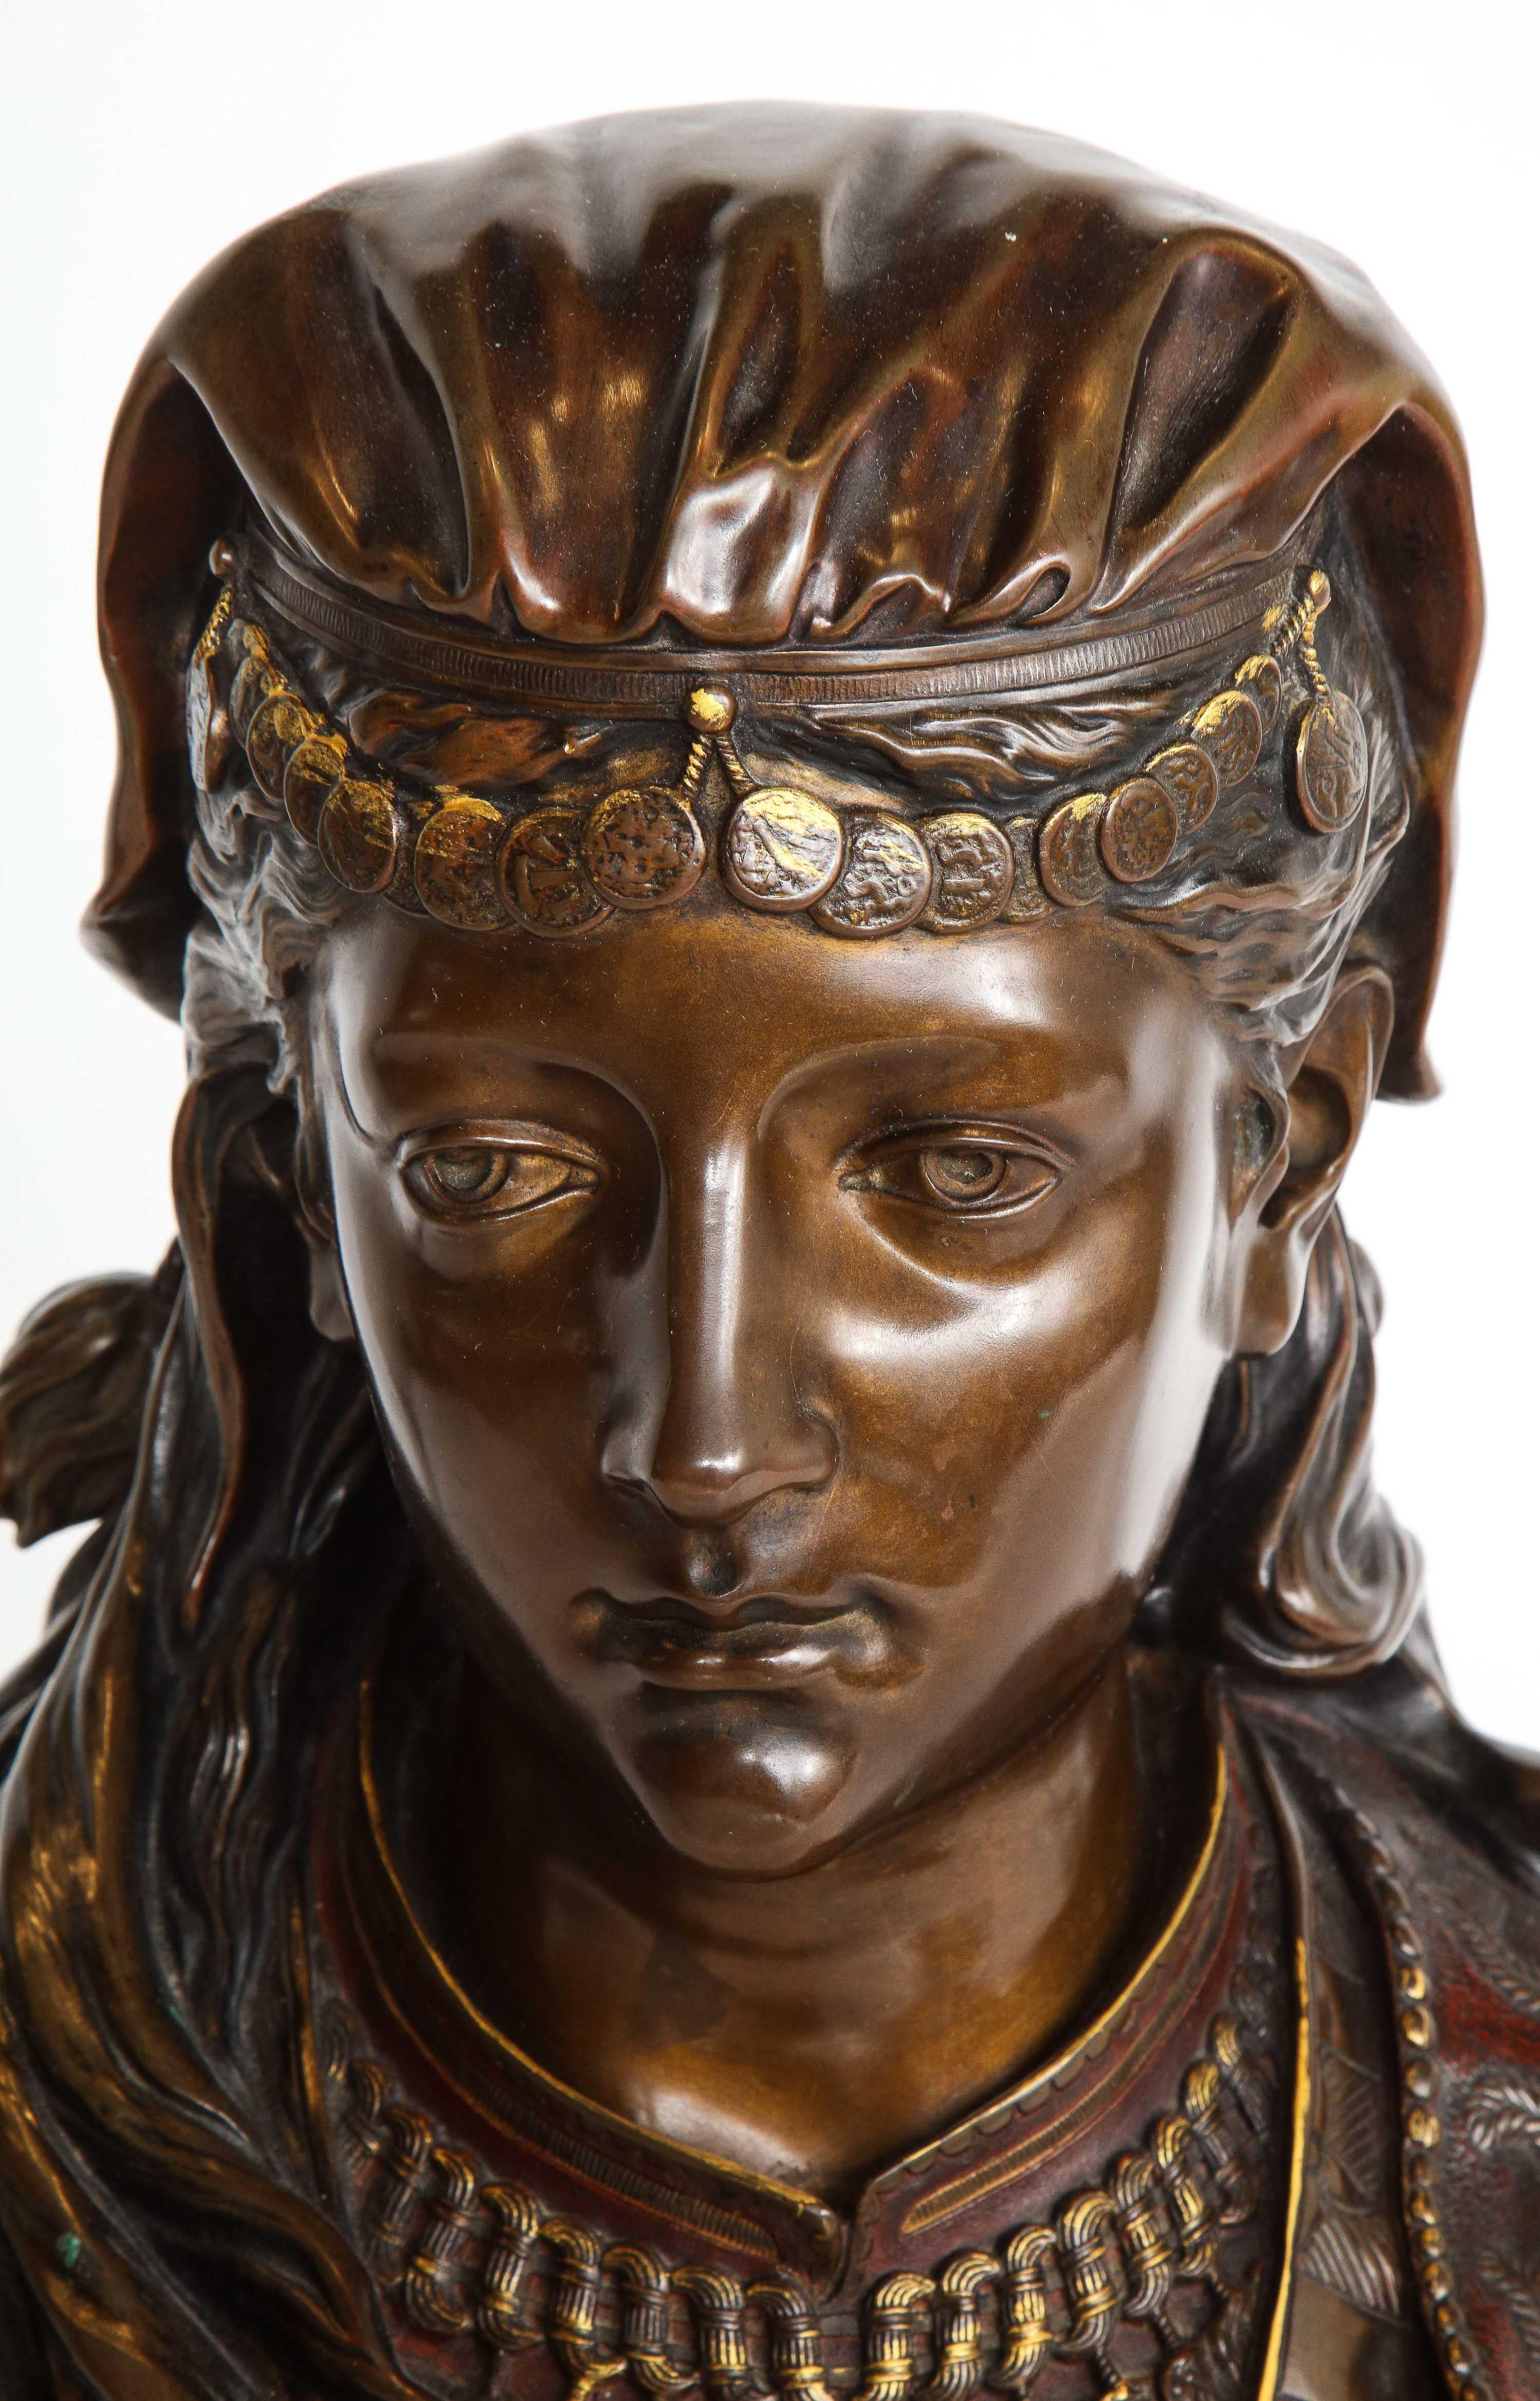 An Exquisite French Multi-Patinated Orientalist Bronze Bust of Beauty, by Rimbez 1